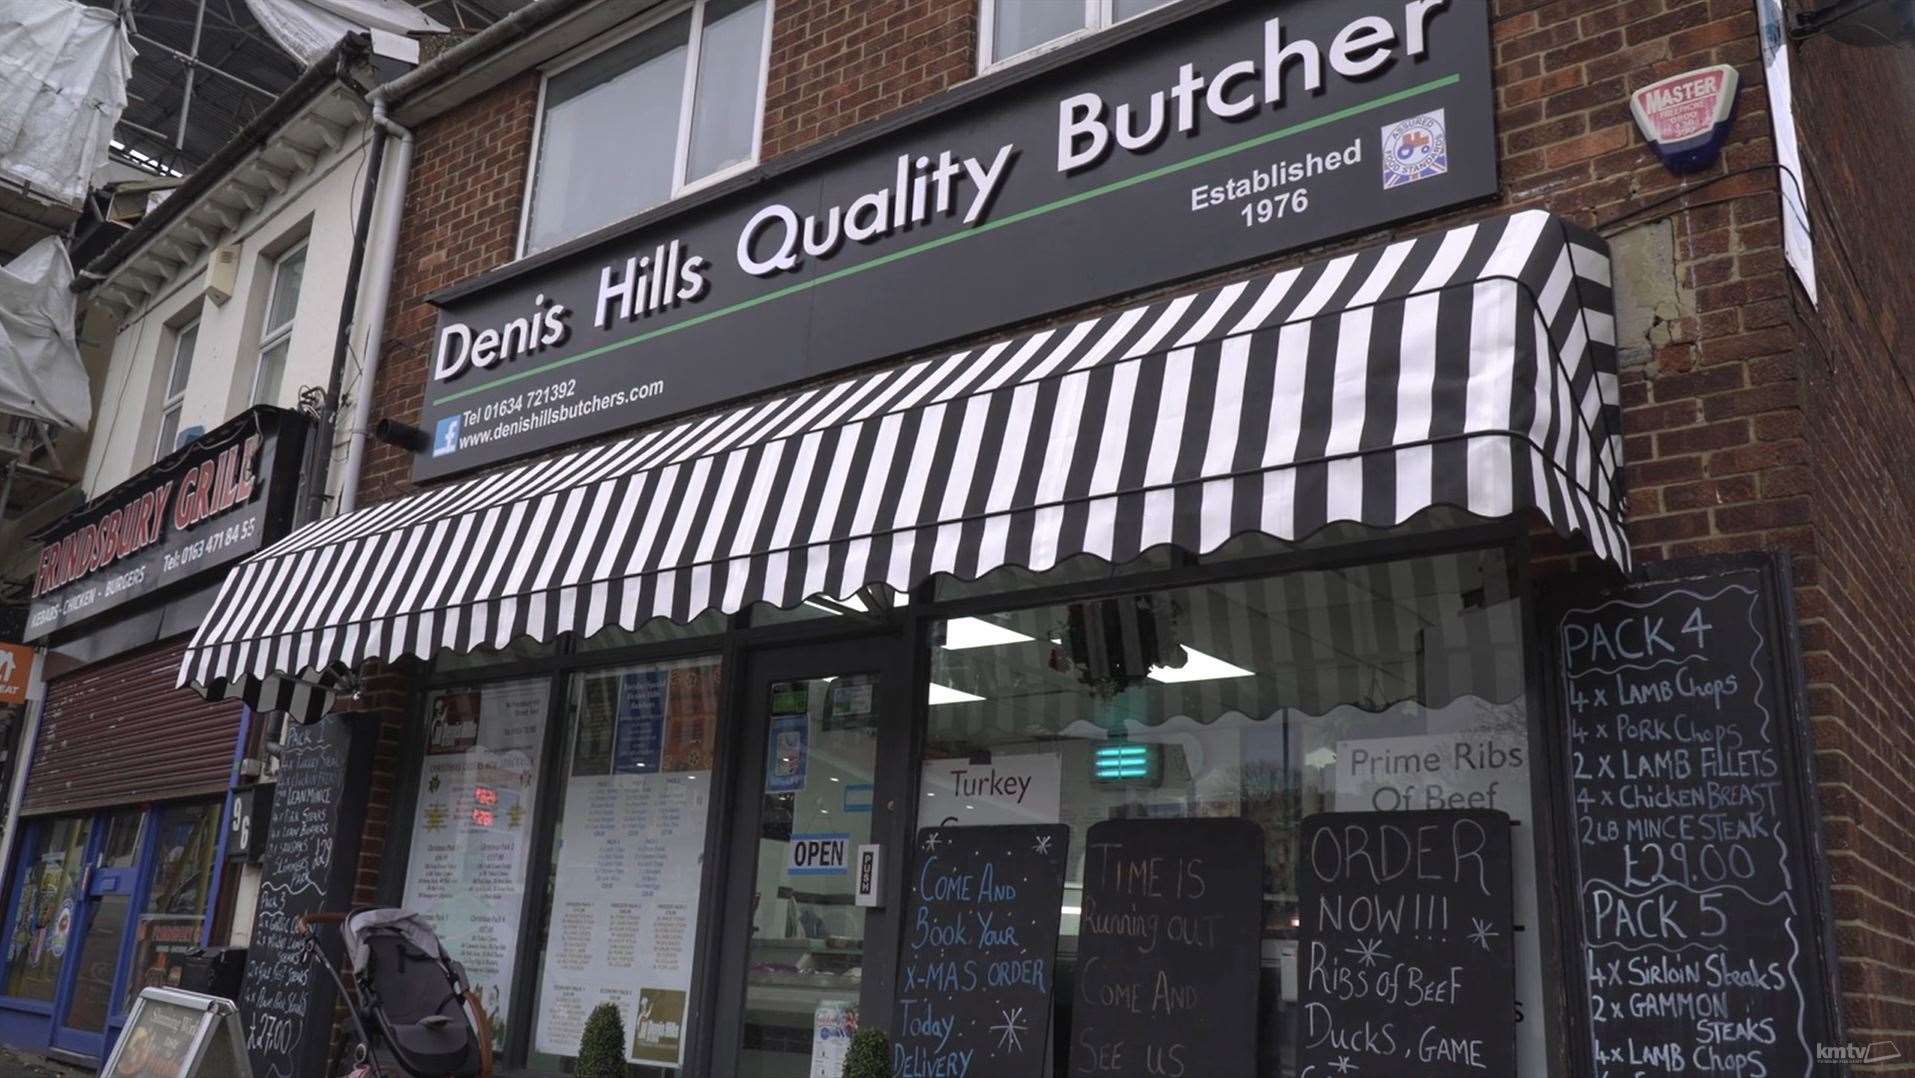 Denis Hills Quality Butcher, which has operated for 47 years, faces a battle to stay afloat as energy costs rise